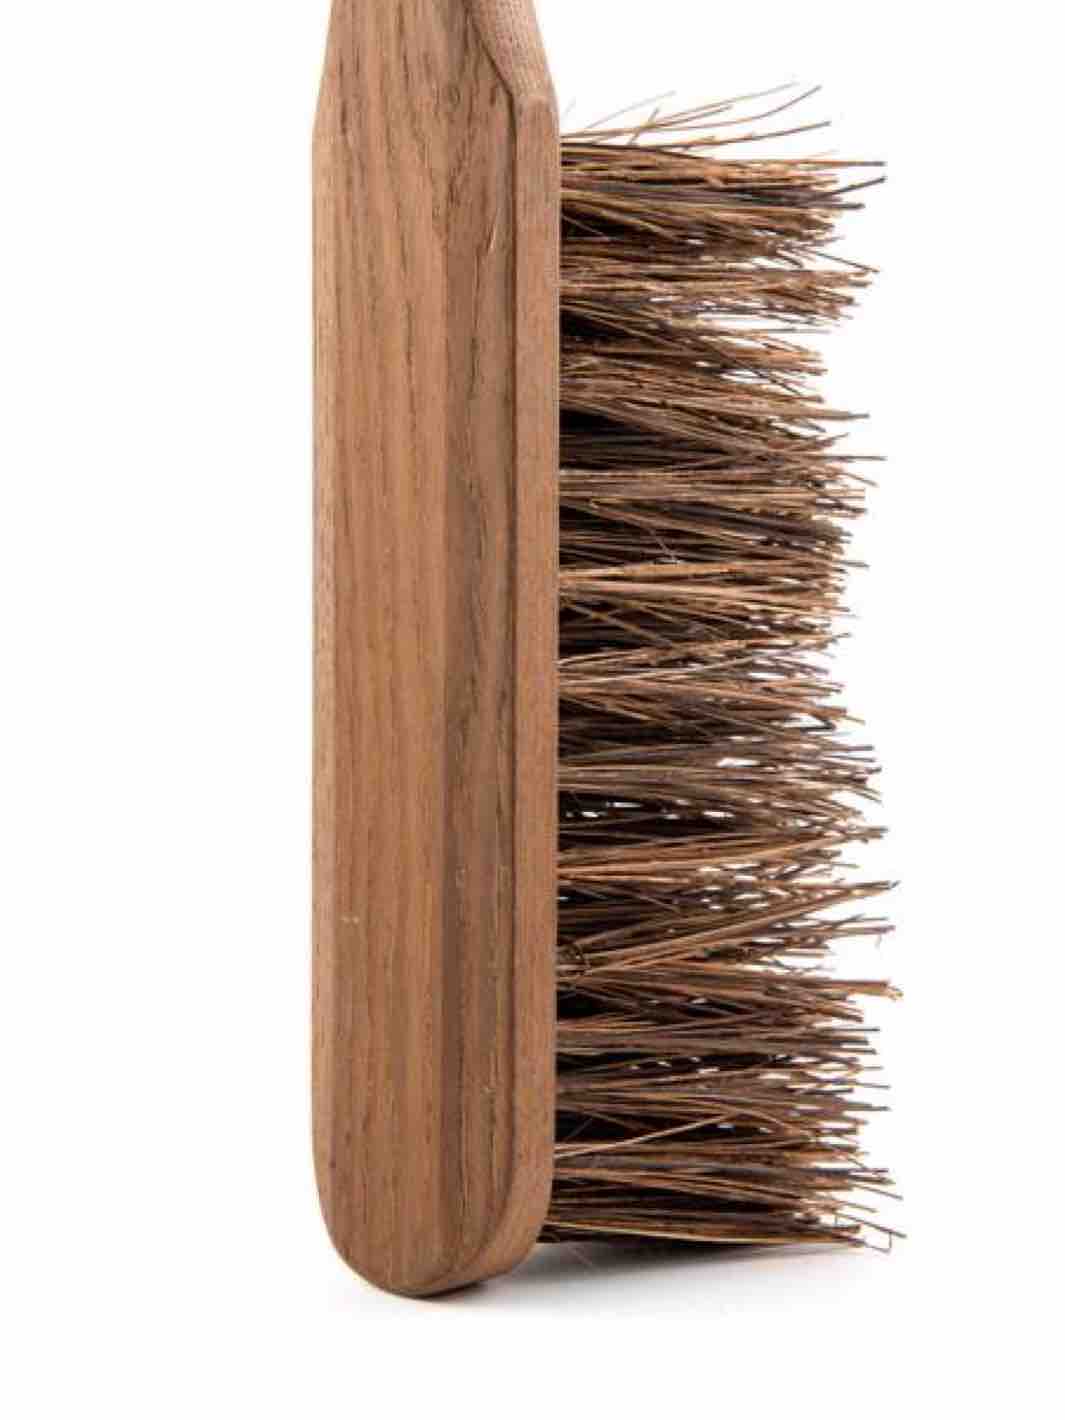 Andree' Jardin Traditional Handled Dish Brush - Head Only Refill